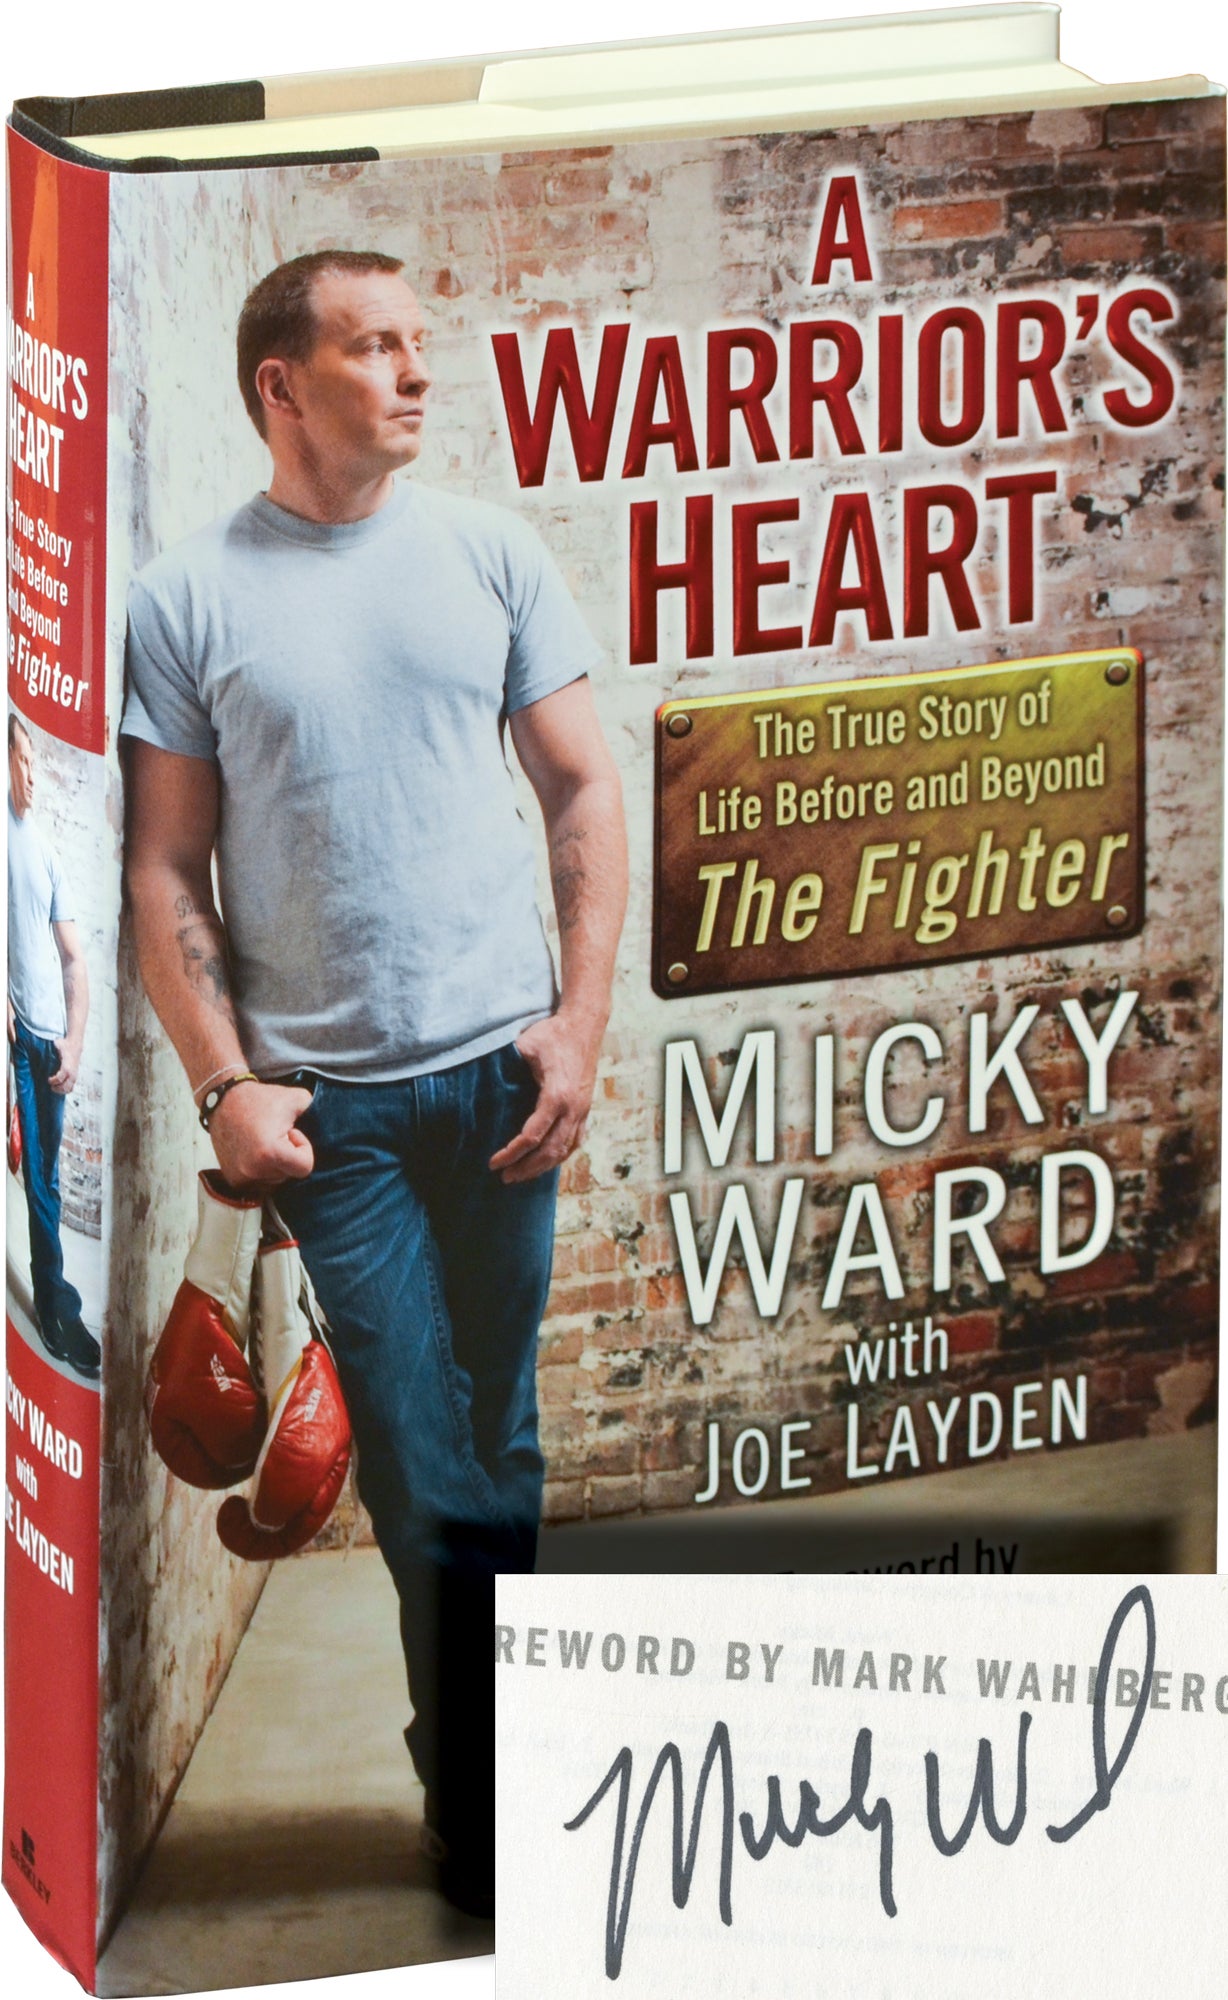 of　Warrior's　A　and　Ward,　The　Micky　Mark　Joy　foreword　Life　Fighter　Heart:　True　The　Before　First　Story　Beyond　Wahlberg,　Layden,　Edition